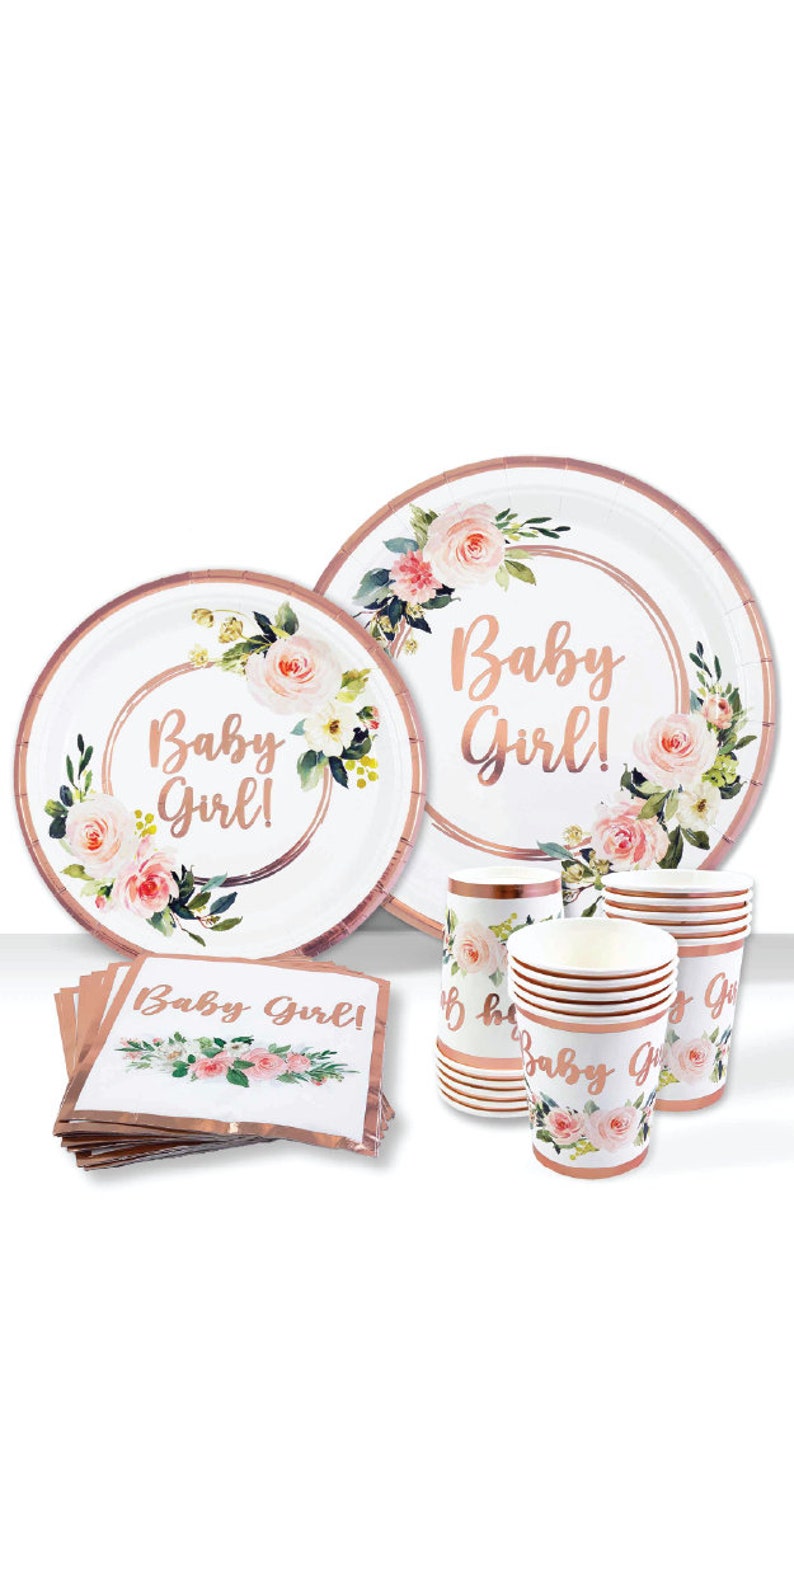 Baby Shower Tableware, Party Supplies Kit, Plates and Napkins, Baby Girl Decorations, 25 Servings, Rose Gold Foil, Rose Floral Paper Plates Bild 2